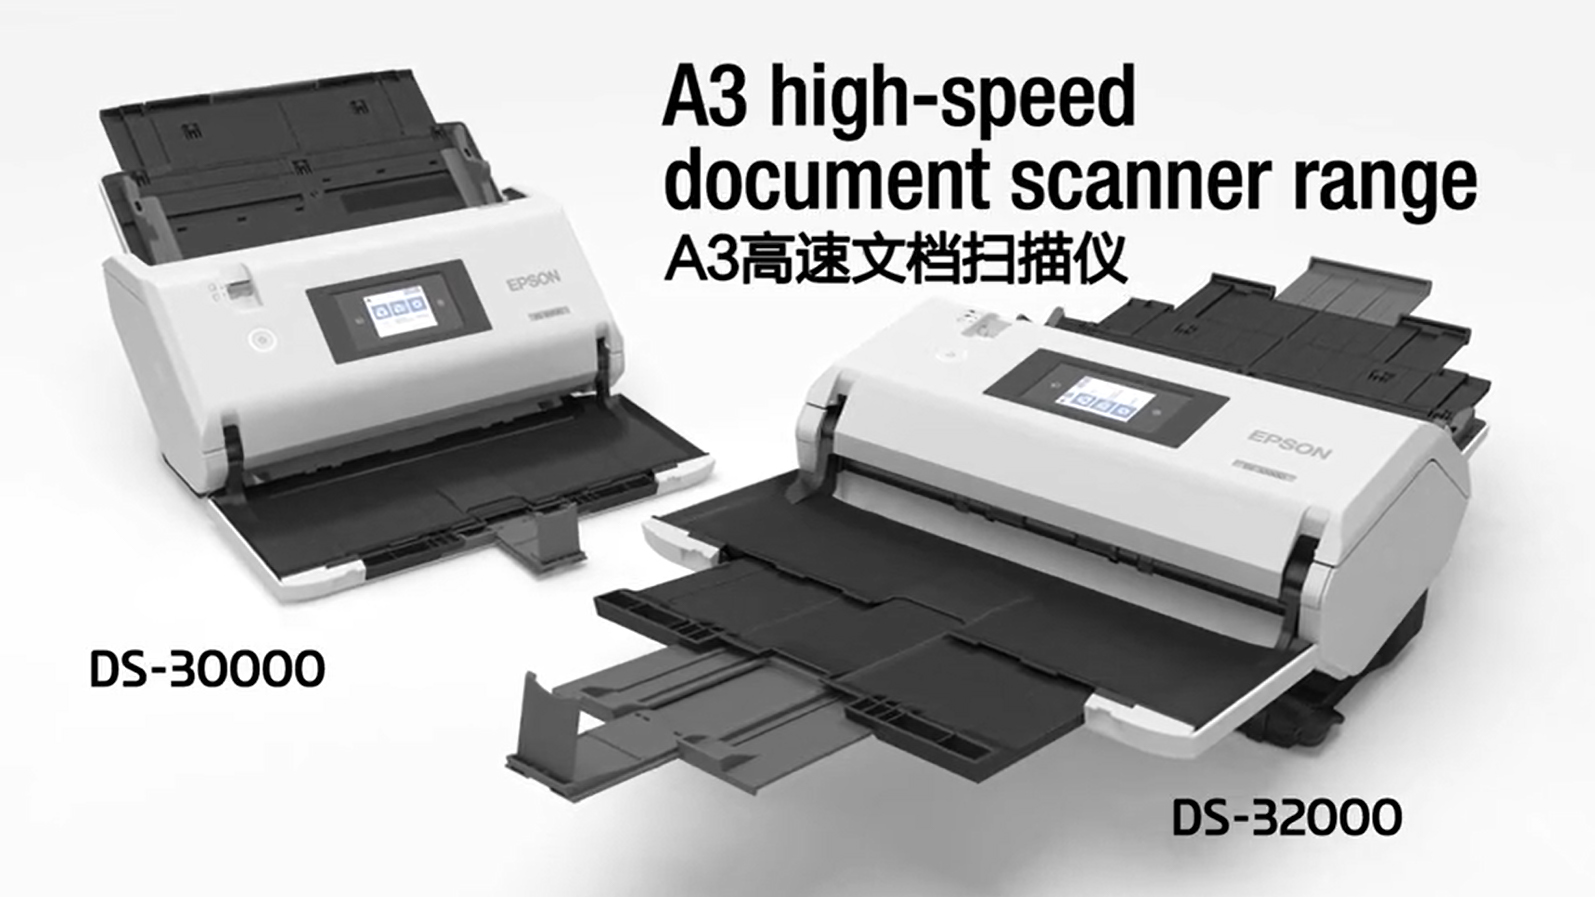 EPSON_PRODUCTS_Epson DS-31100